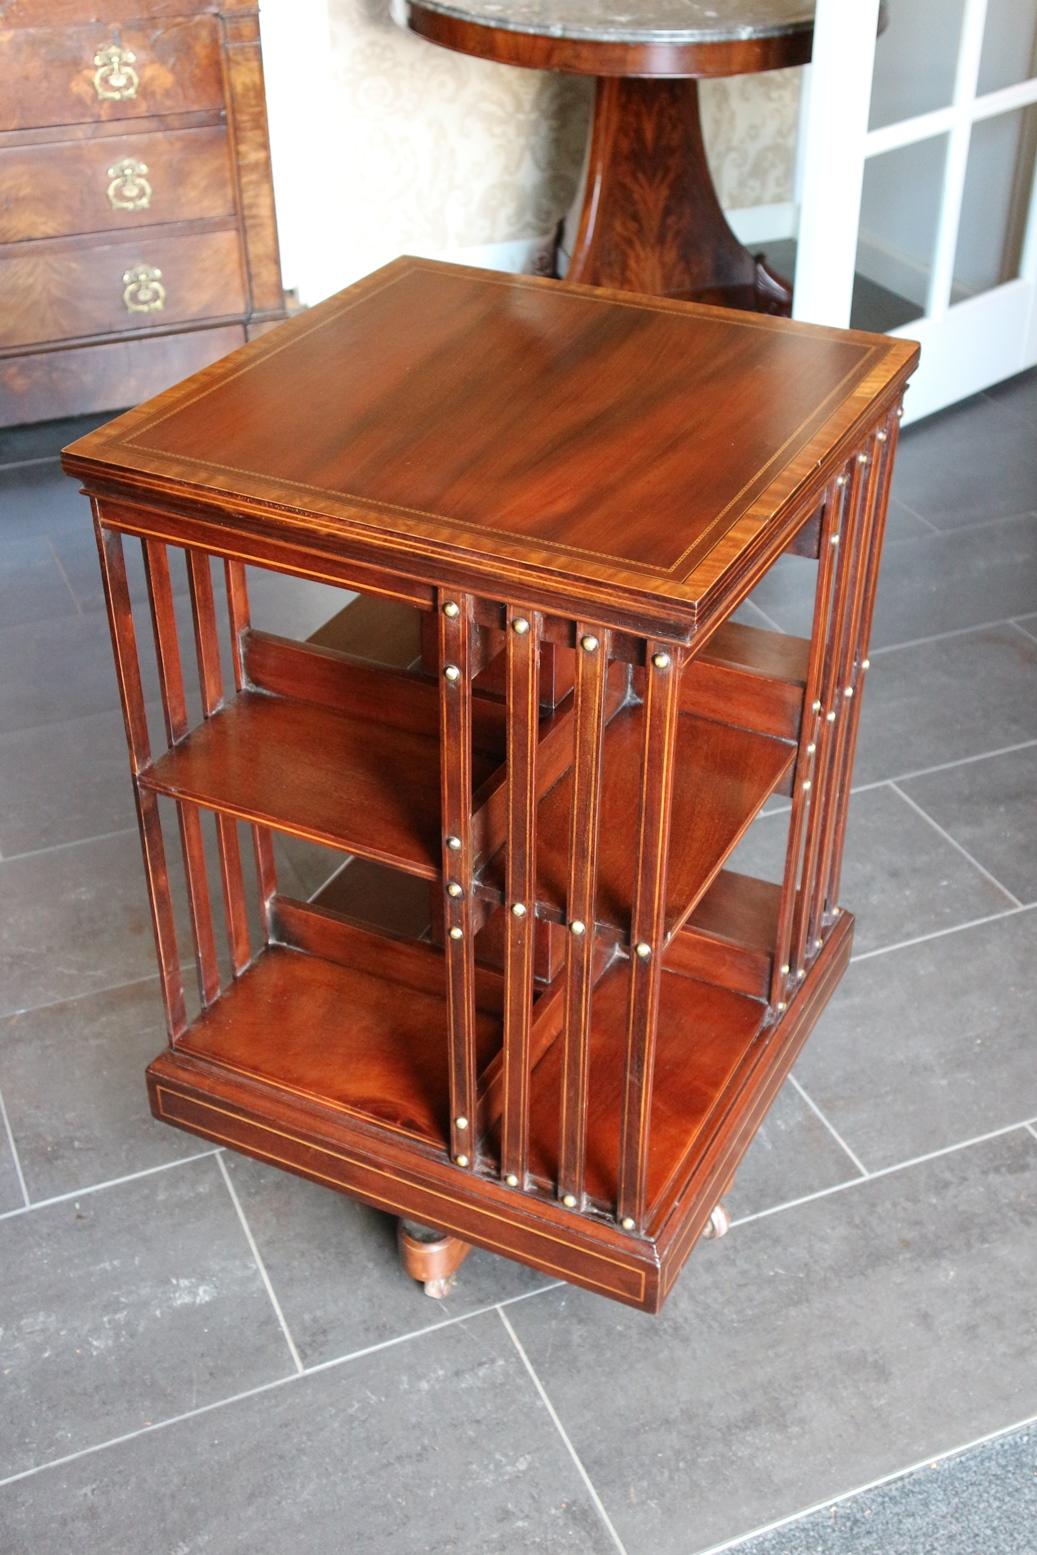 Beautiful antique mahogany revolving bookcase, inlaid with ebony and satin wood. Superb quality revolving bookcase of the famous 19th century English furniture maker Maple & Co. with the typical cast iron base. Nice color and appearance
Origin: